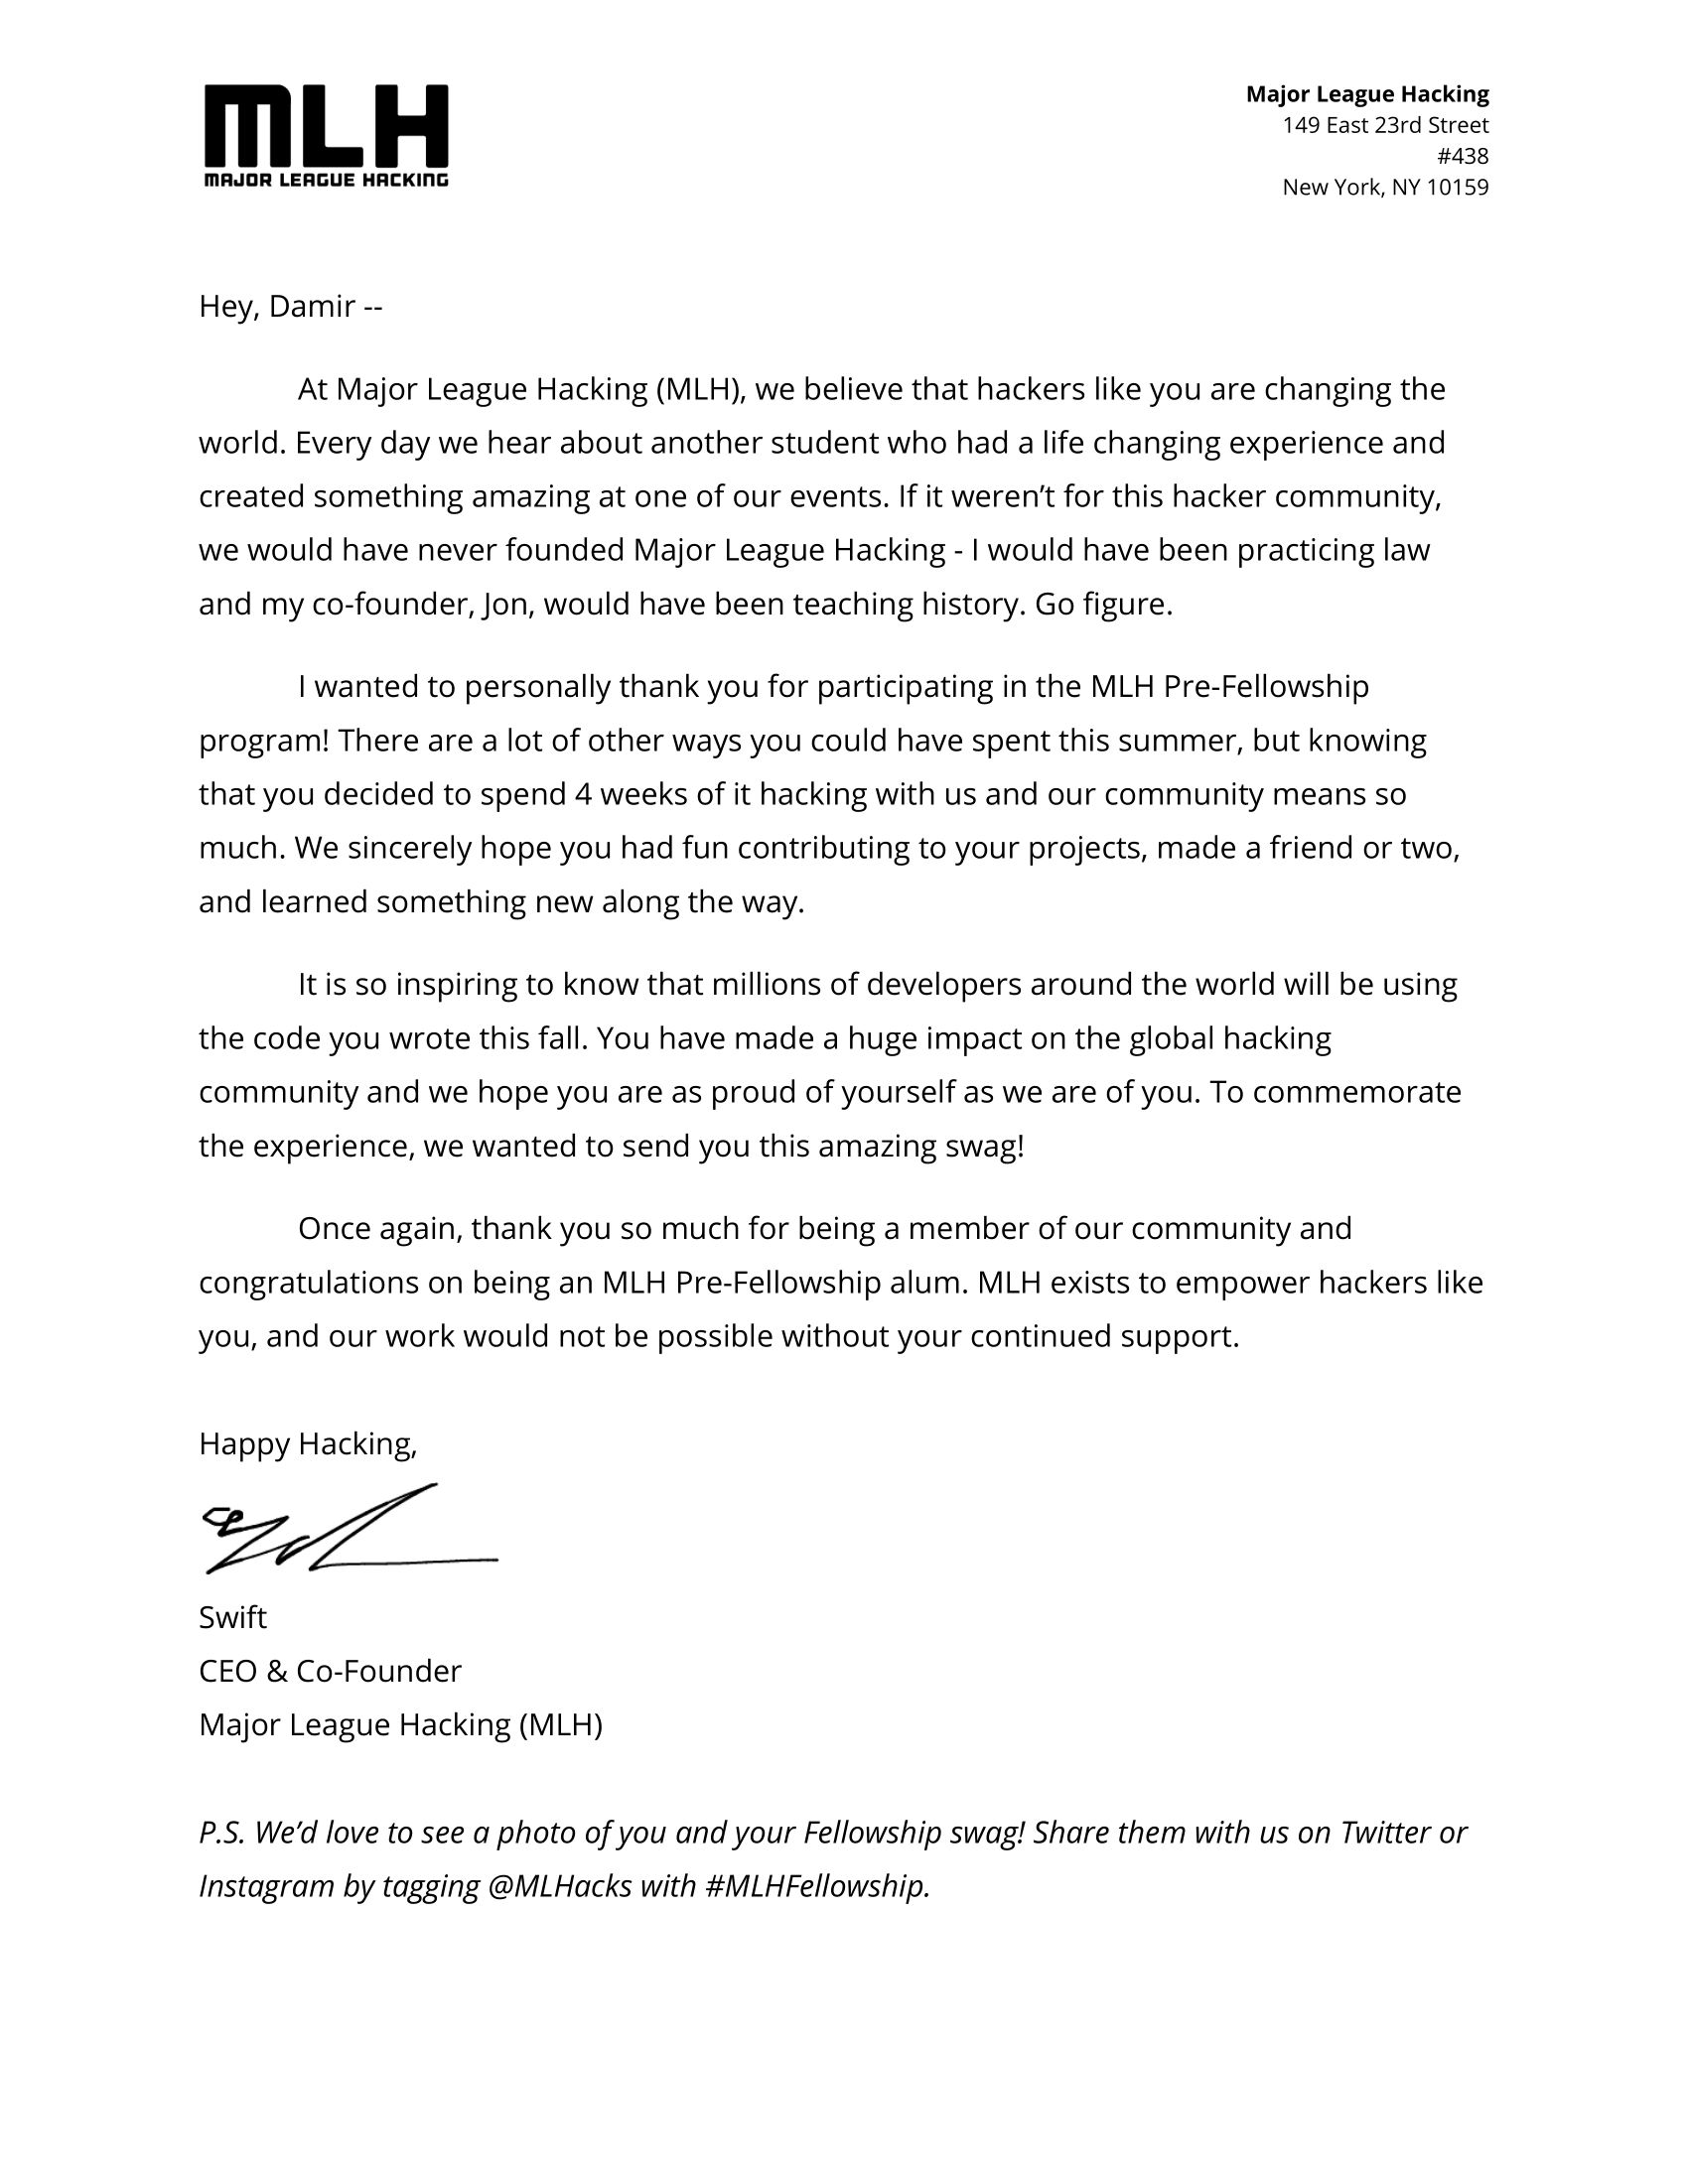 Graduation Letter from MLH's CEO Swift